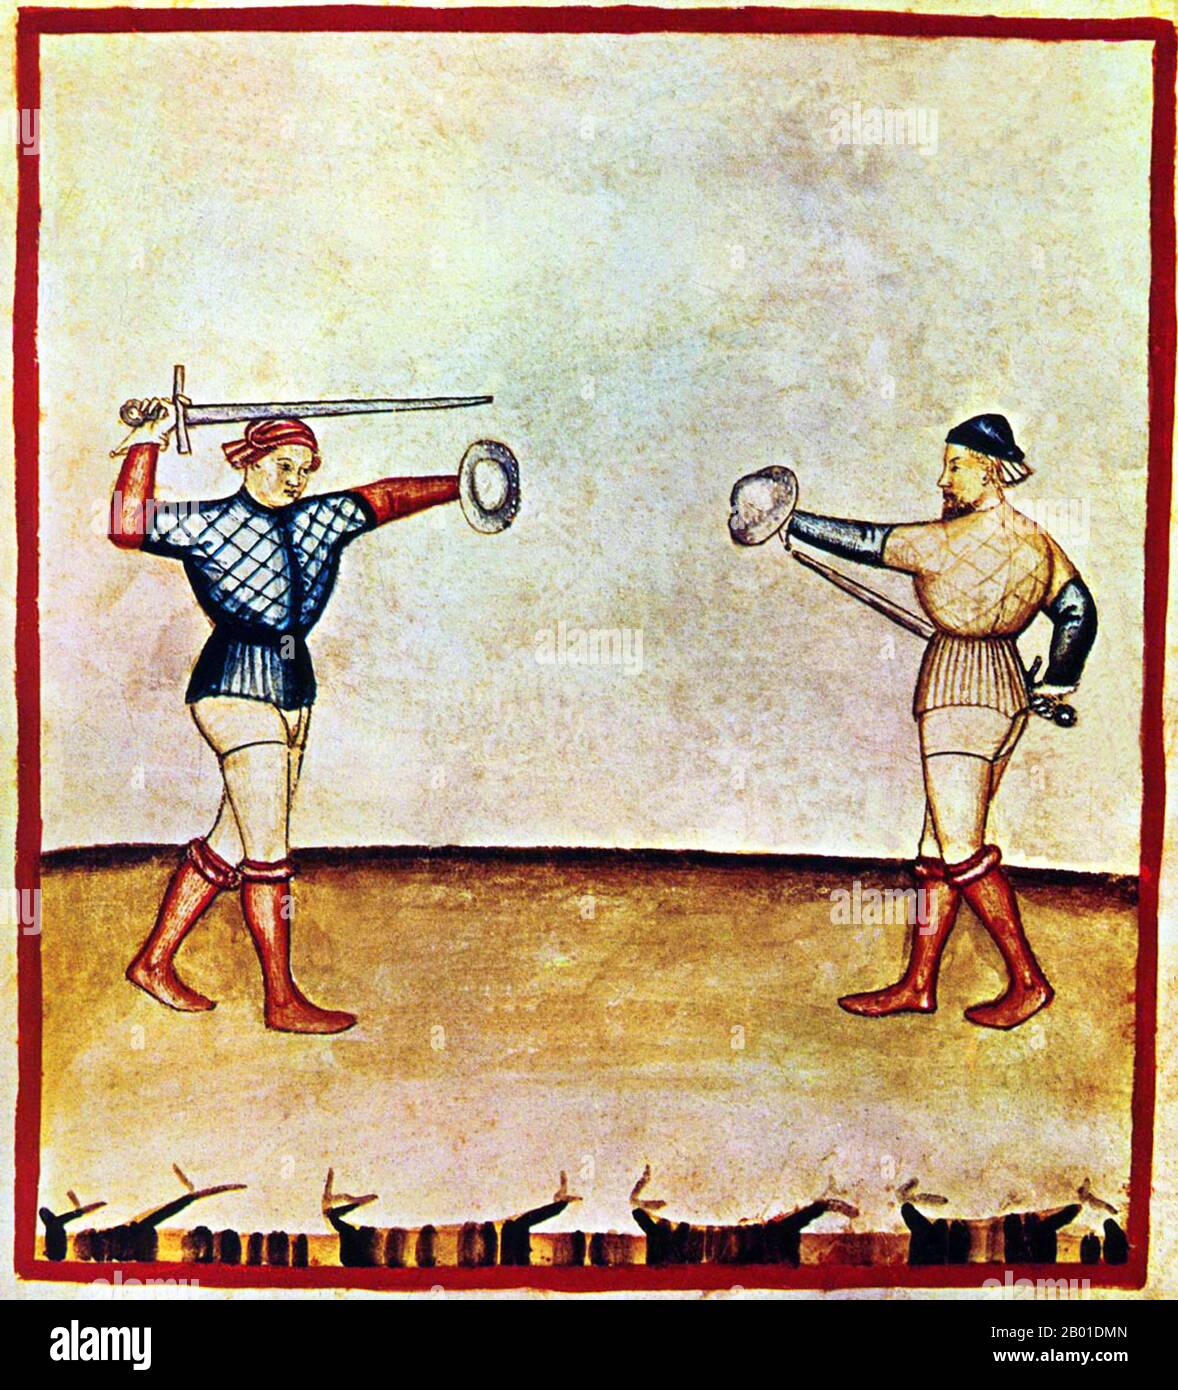 Iraq/Italy: Exercise - men fencing or duelling. Illustration from Ibn Butlan's Taqwim al-sihha or 'Maintenance of Health', published in Italy as the Tacuinum Sanitatis, 14th century.  The Tacuinum (sometimes Taccuinum) Sanitatis is a medieval handbook on health and wellbeing, based on the Taqwim al‑sihha, an eleventh-century Arab medical treatise by Ibn Butlan of Baghdad.  Ibn Butlân was a Christian physician born in Baghdad and who died in 1068.  He set forth six elements necessary to maintain daily health. Stock Photo